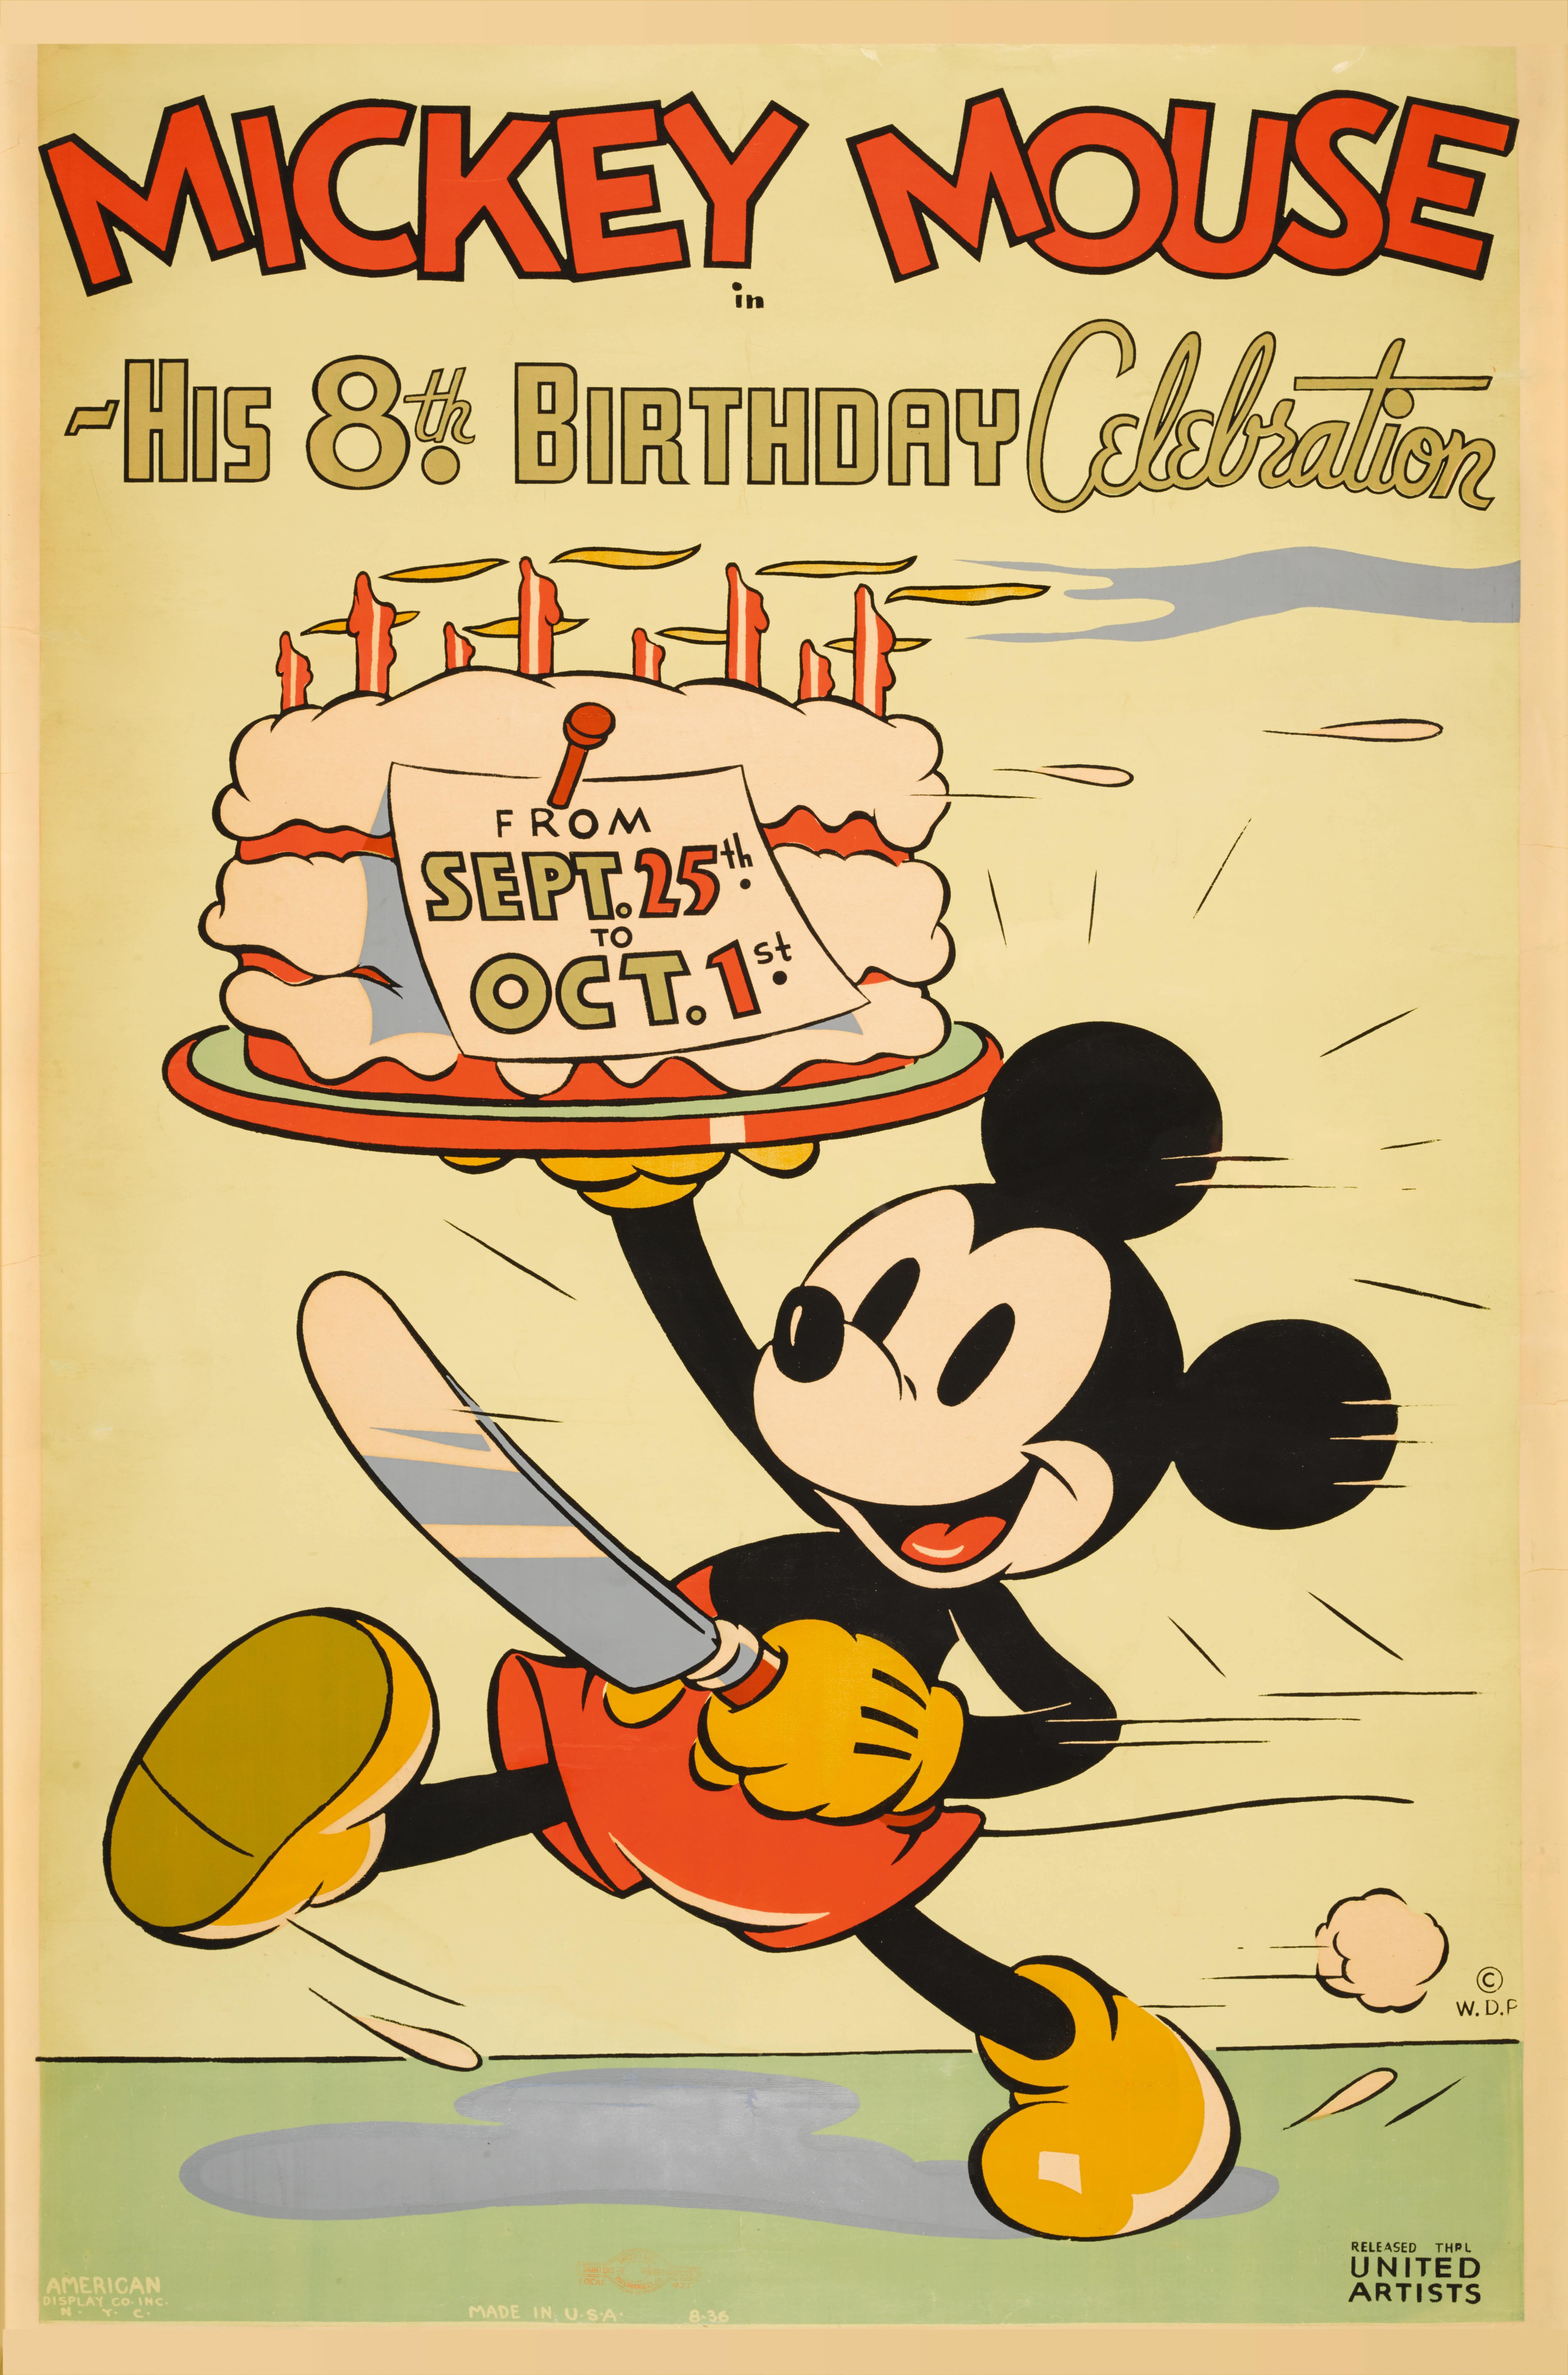 Original US film poster for Mickey Mouse - His 8th Birthday celebration. These Special hand printed silkscreen posters were produced for Walt Disney throughout the mid-1930s. These were used to promote Walt Disney's cartoons and characters, and were